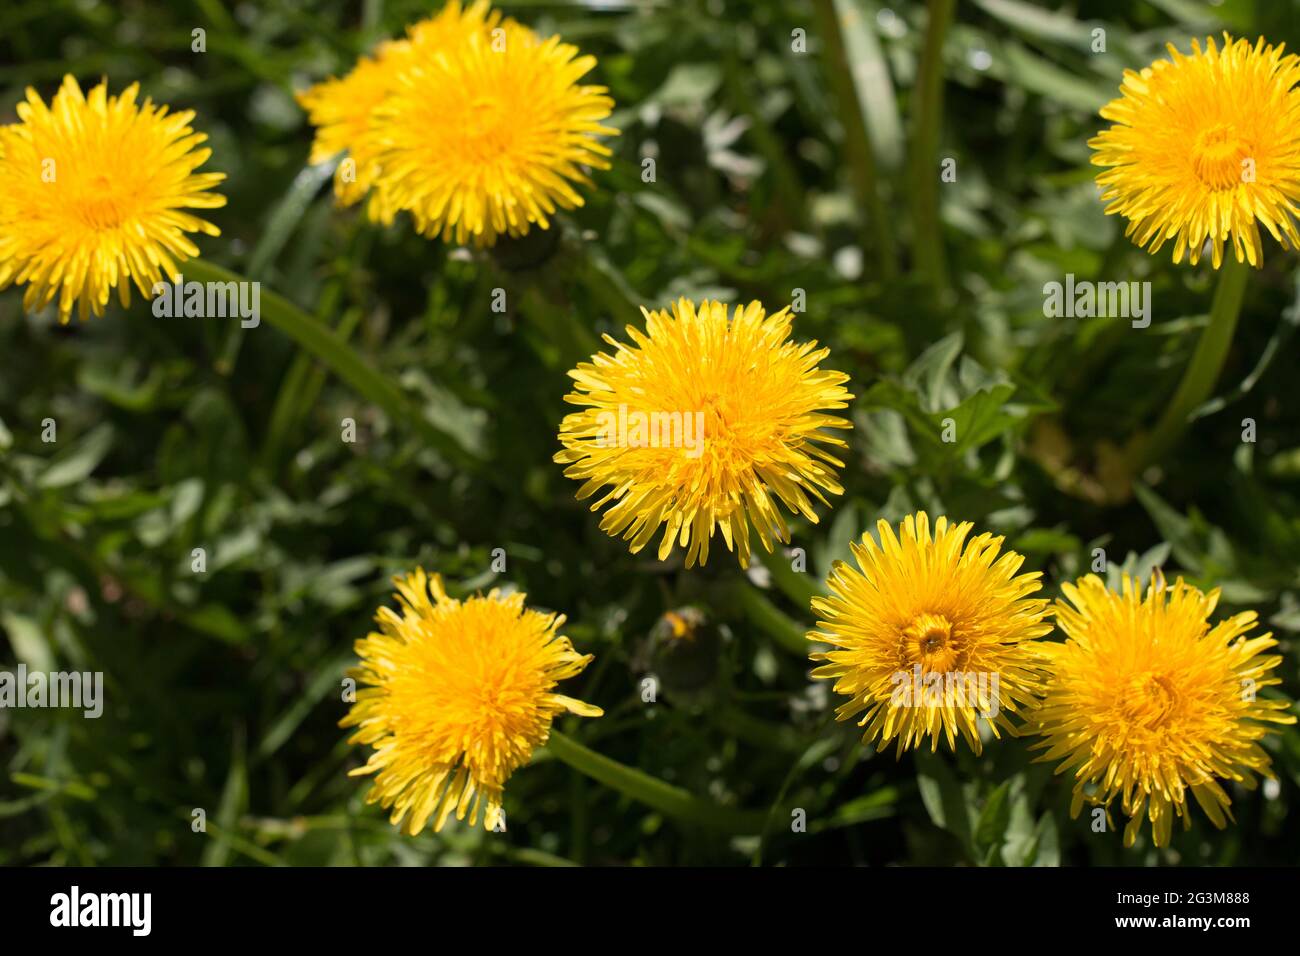 A cluster of yellow dandelion flowers, Taraxacum officinale, lions tooth or clockflower, blooming in the spring sunshine, Shropshire, England Stock Photo